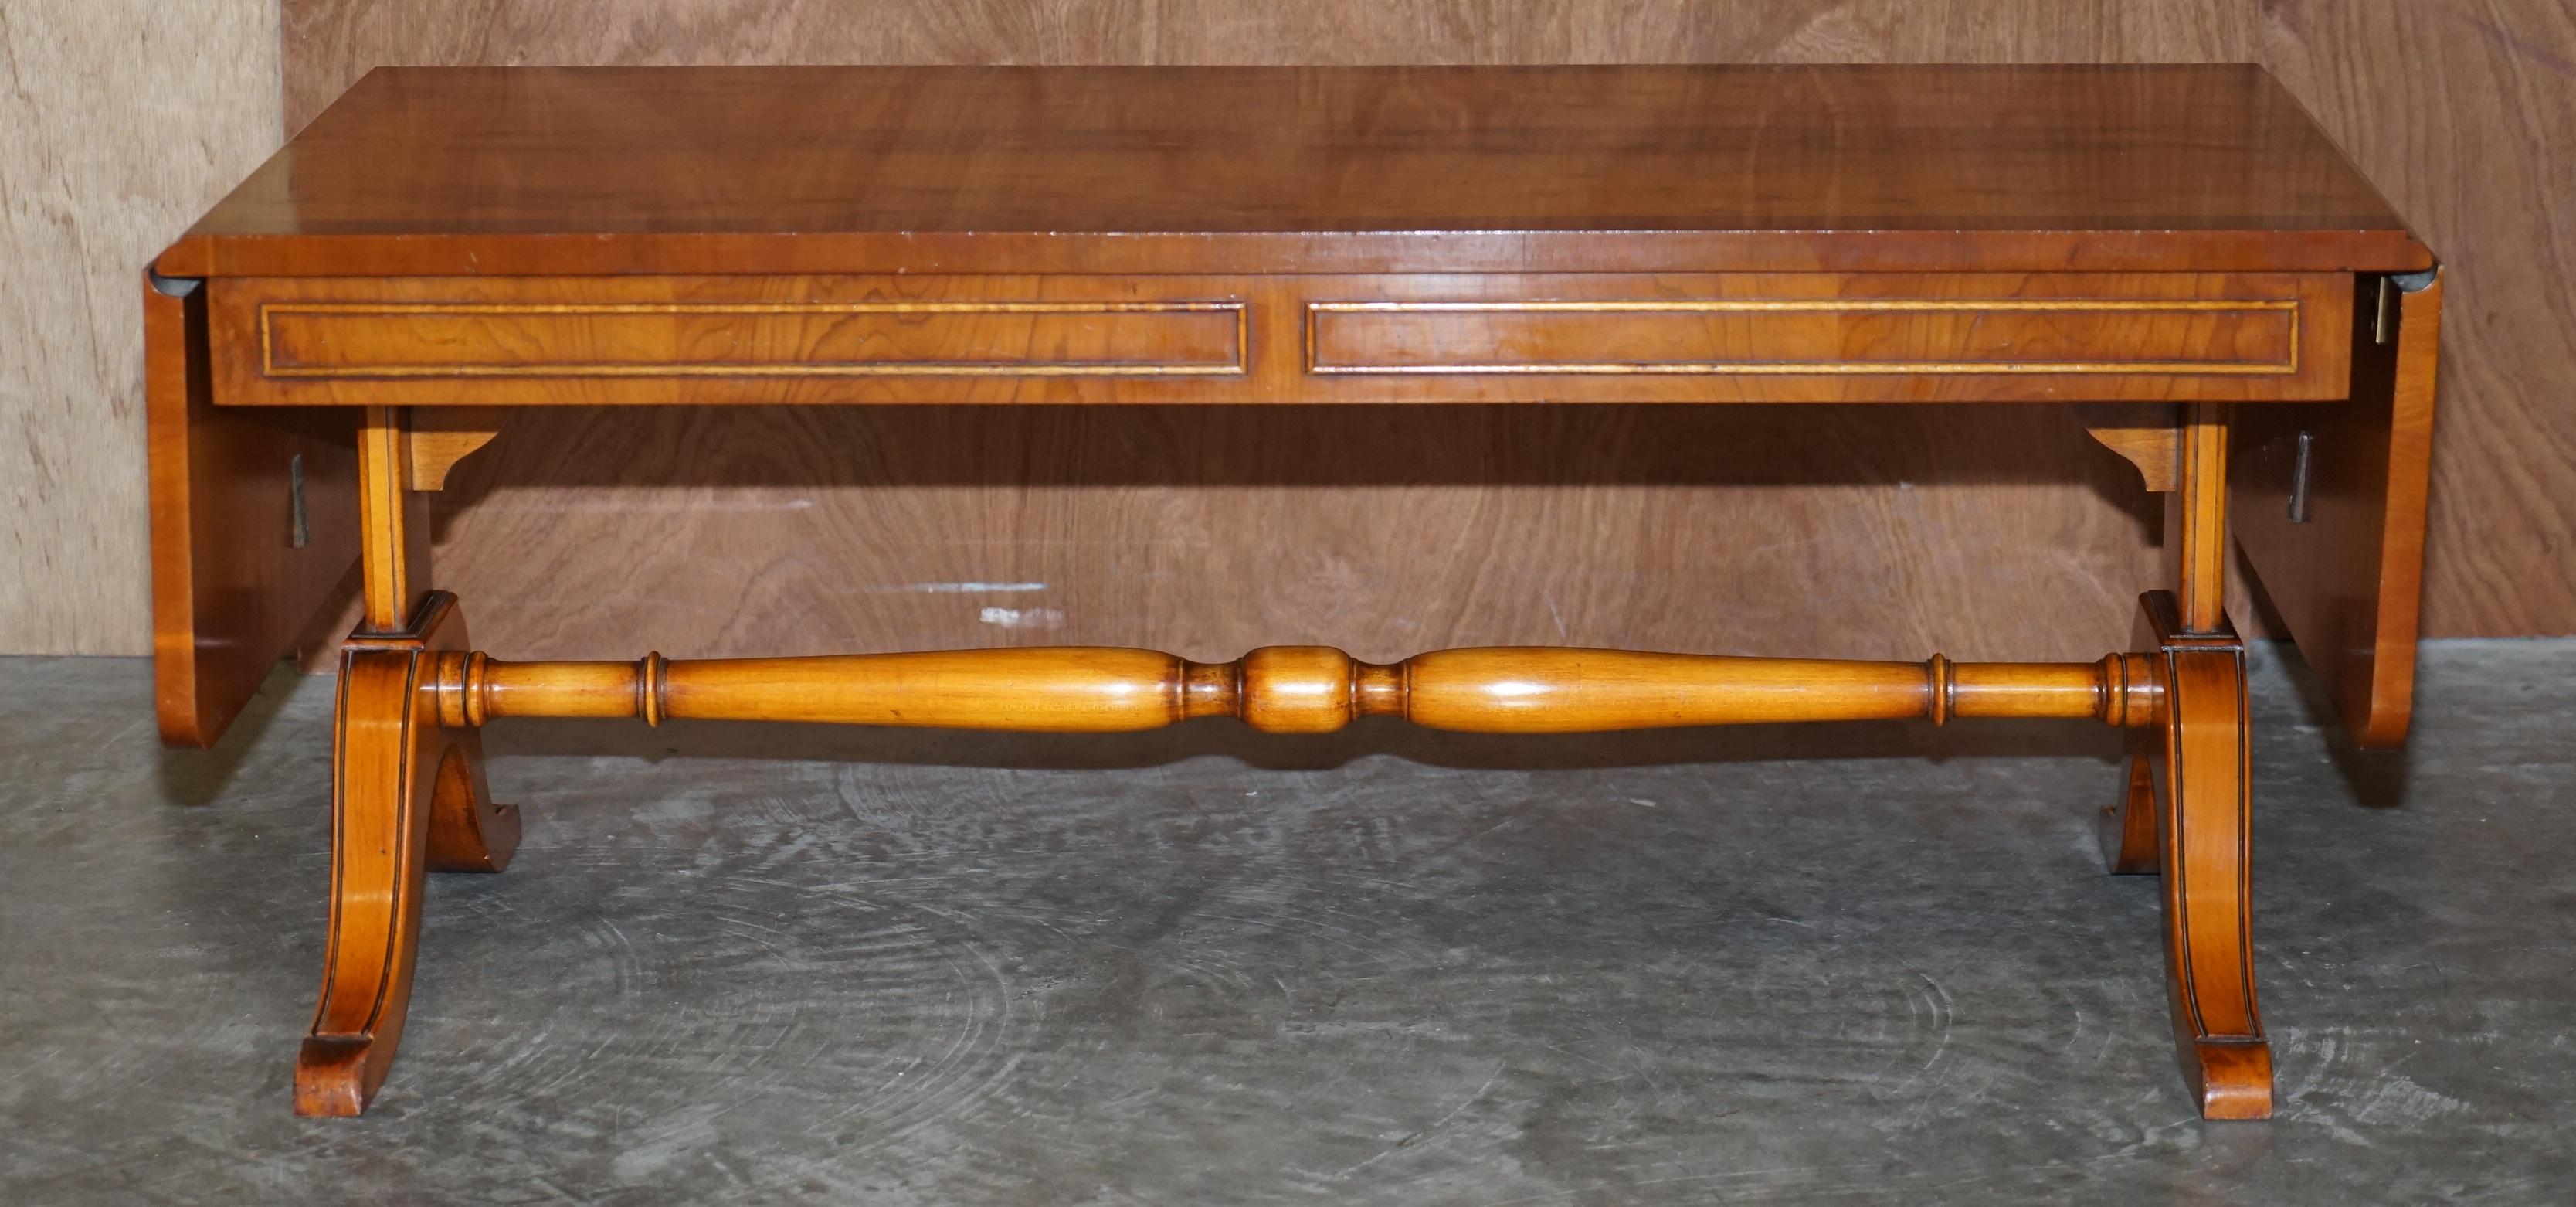 Sublime Vintage Bevan Funnell Extending Burr Yew Wood Coffee Table Part of Suite For Sale 4